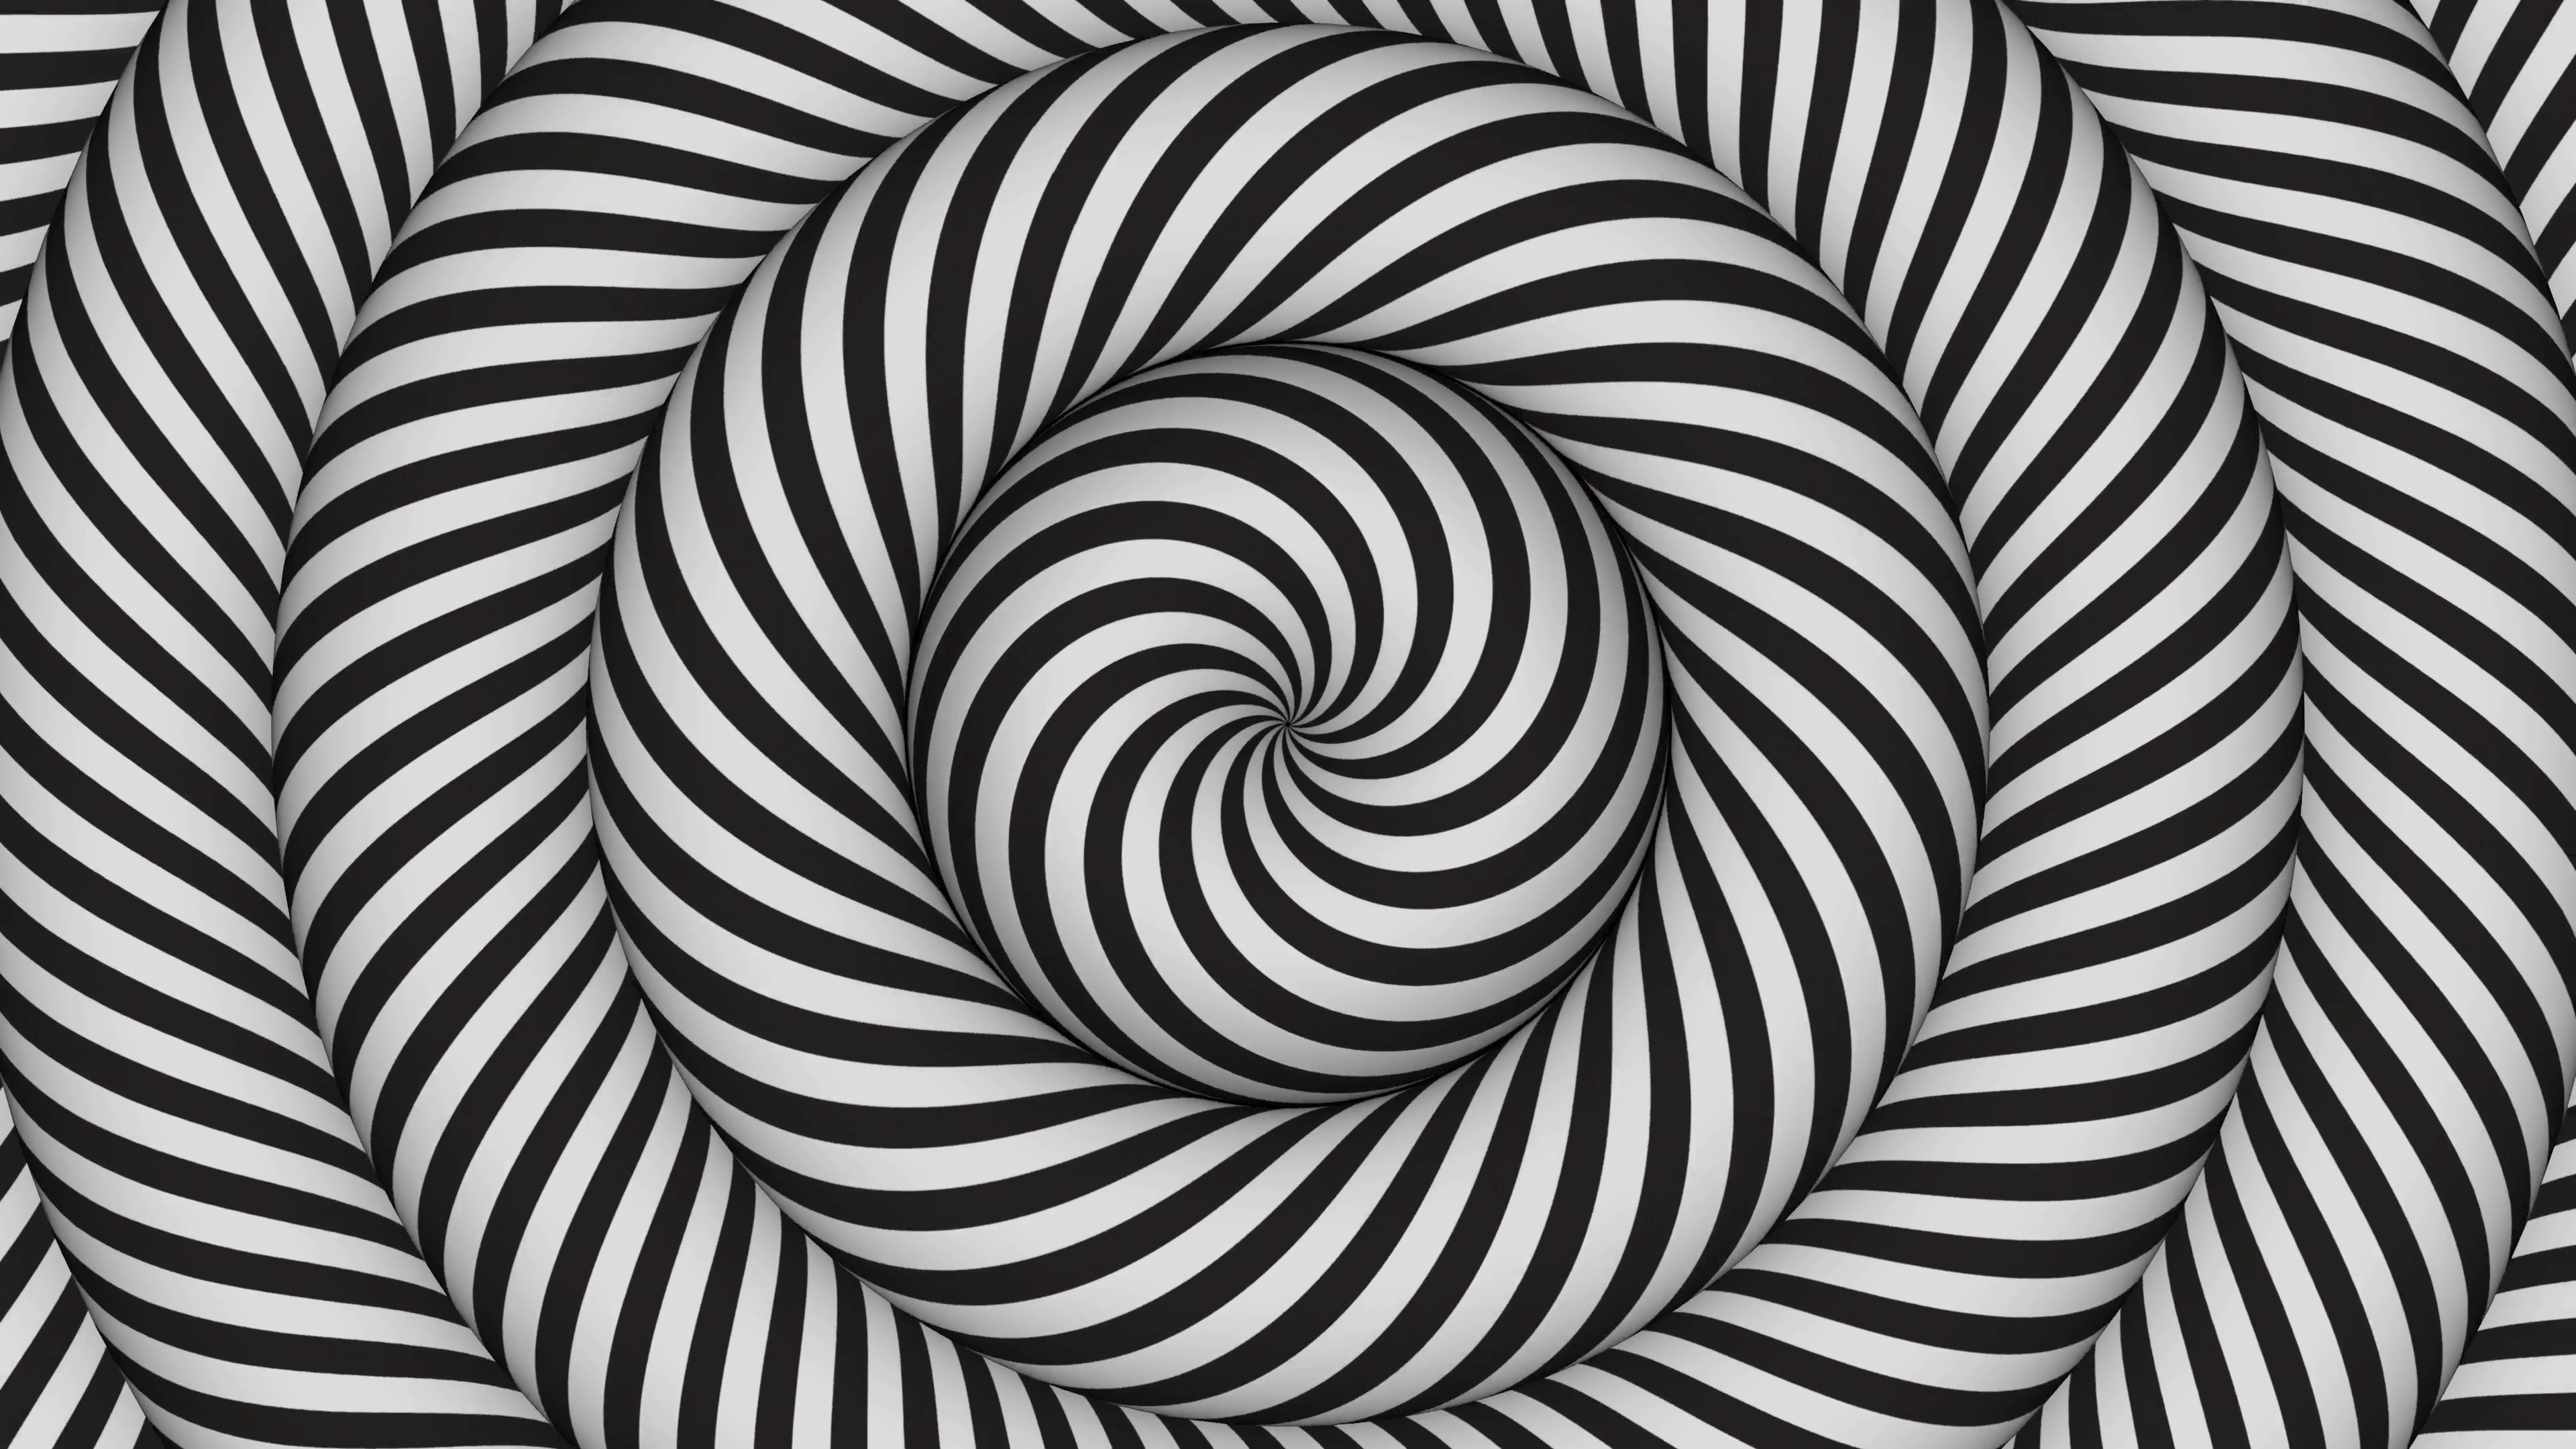 hypnotic background with black and white concentric circles